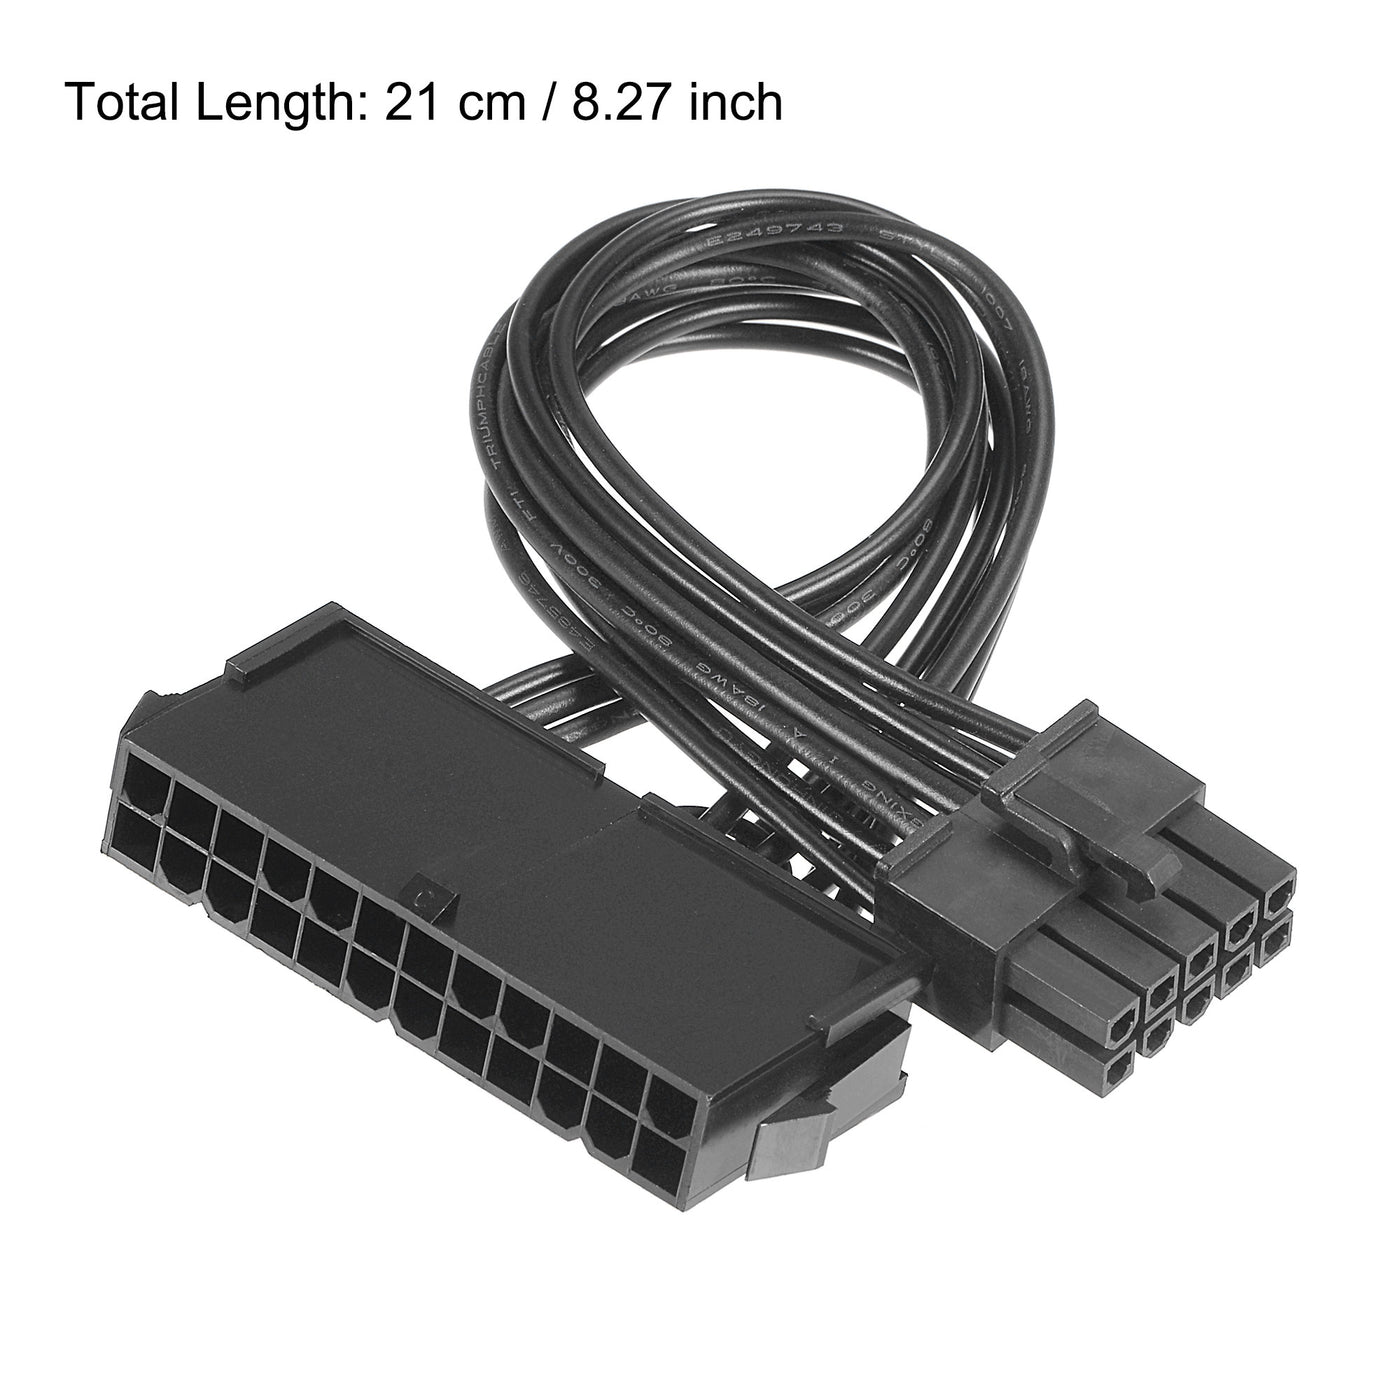 uxcell Uxcell 24 to 10 Pin Mainboard Power Cable for Modular Board 18 AWG 21cm